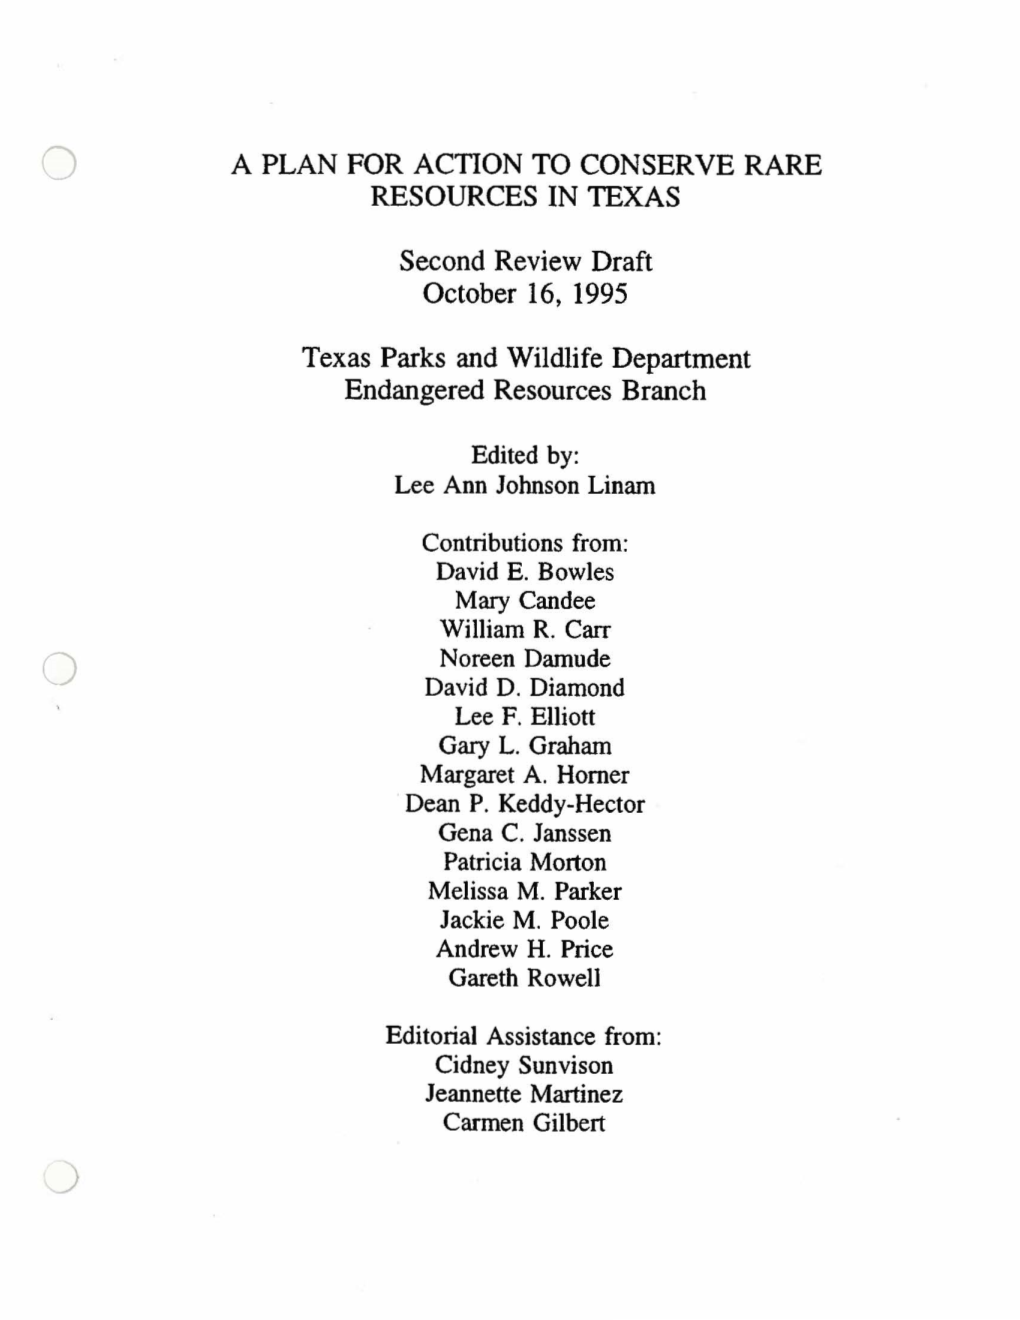 A PLAN for ACTION to CONSERVE RARE RESOURCES in TEXAS Second Review Draft October 16, 1995 Texas Parks and Wildlife Department E